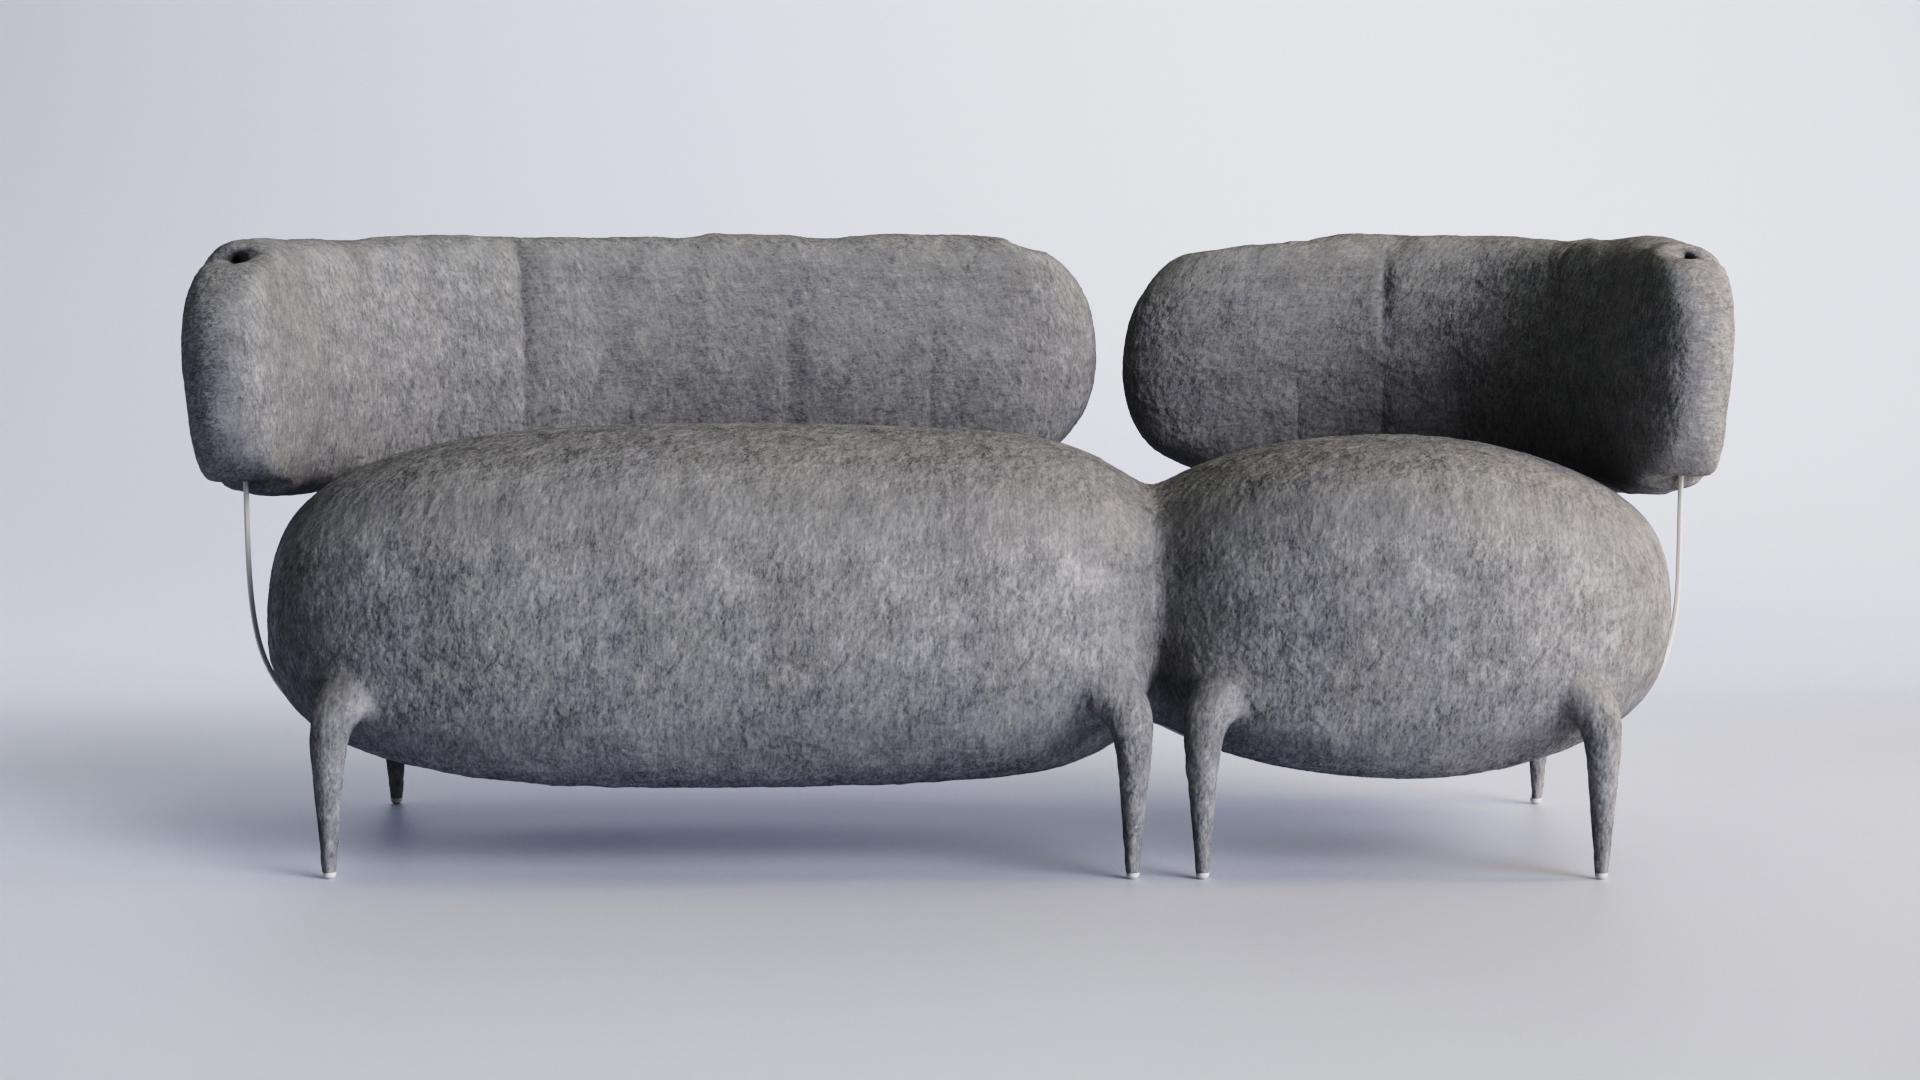 Lymphosofa Sofa by Taras Yoom
Limited Edition of 10
Dimensions: D 82 x W 200 x H 82 cm
Materials: Wood, metal, felt, PU.
Available in two upholstery options: Unique felt made by hand using stiff wool fibers, or fabric lining.

Lymphosofa is included